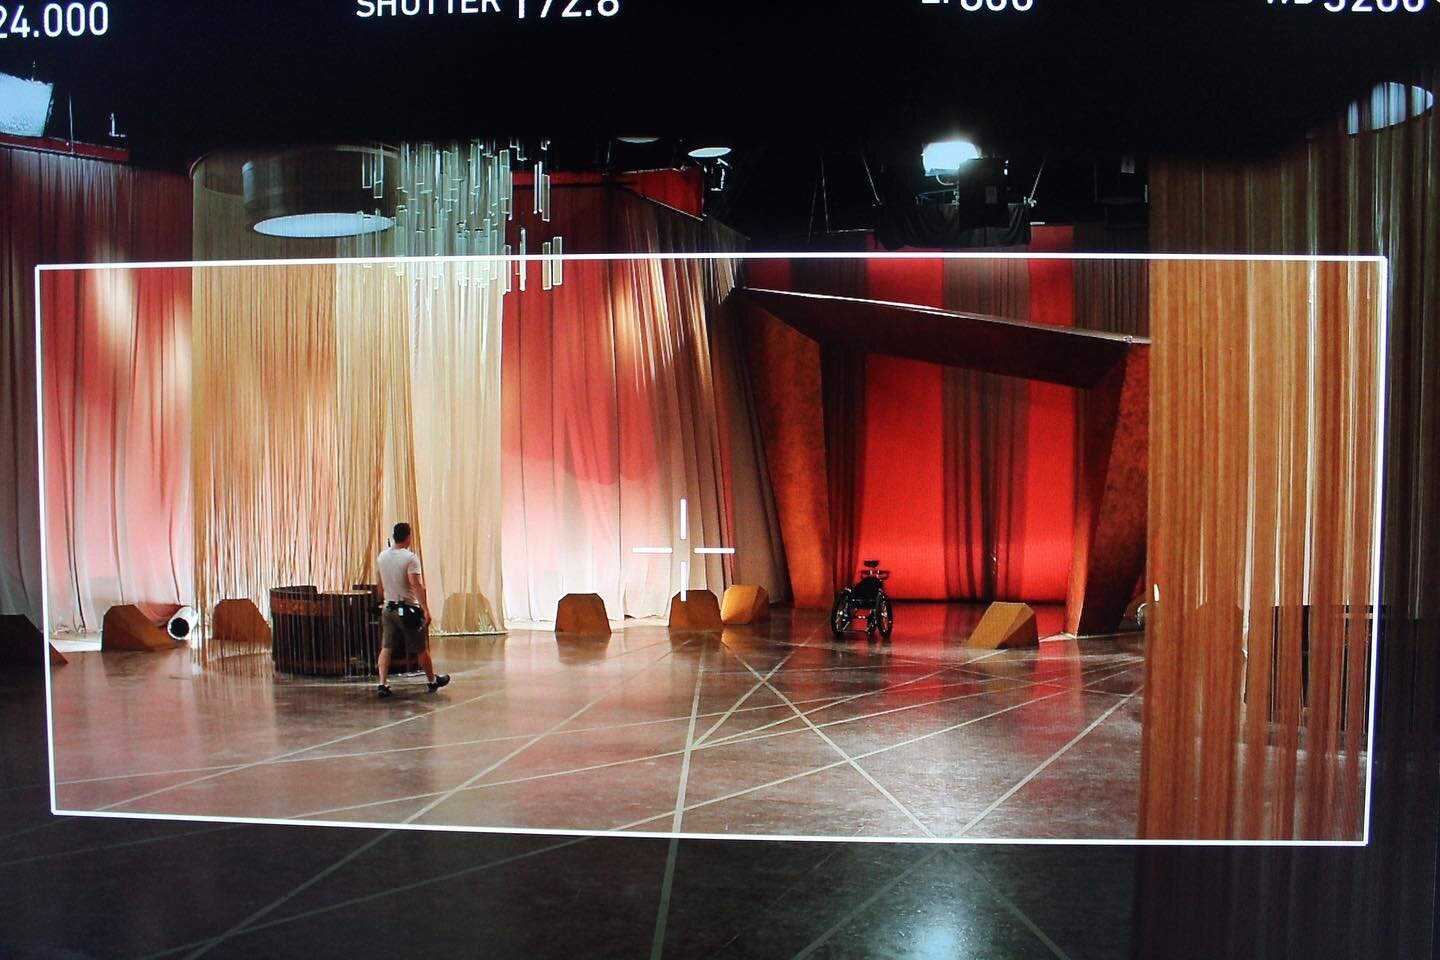 Lining up the interior ballroom. MindGamers 2014. #productiondesign #productiondesigner